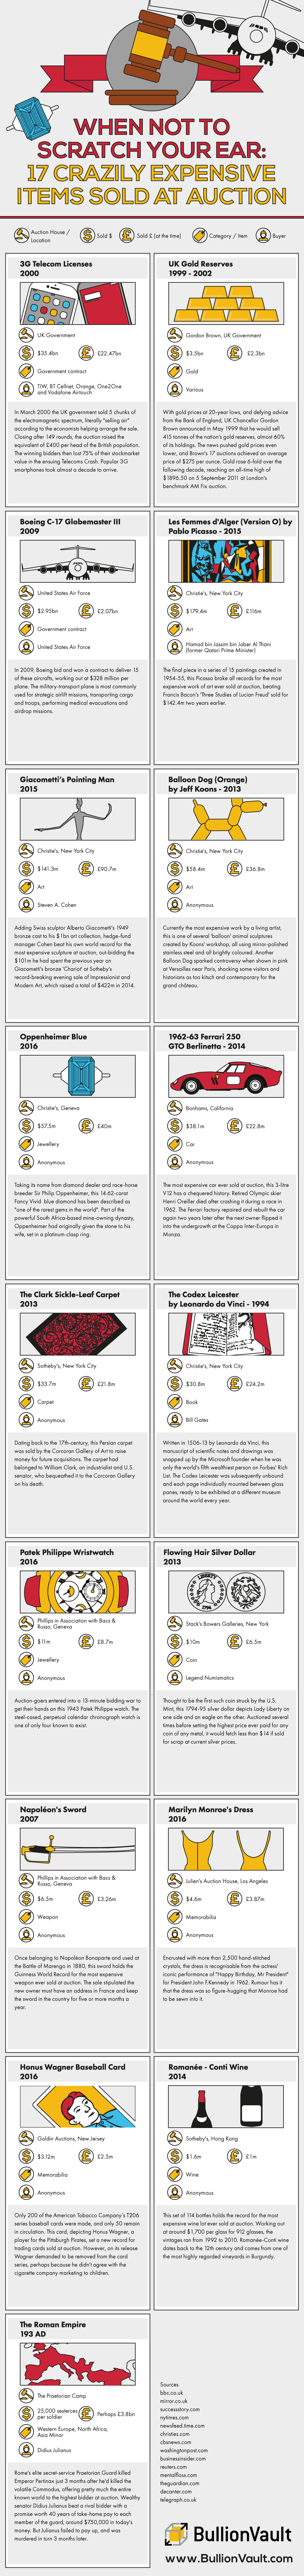 World's most expensive auction items infographic